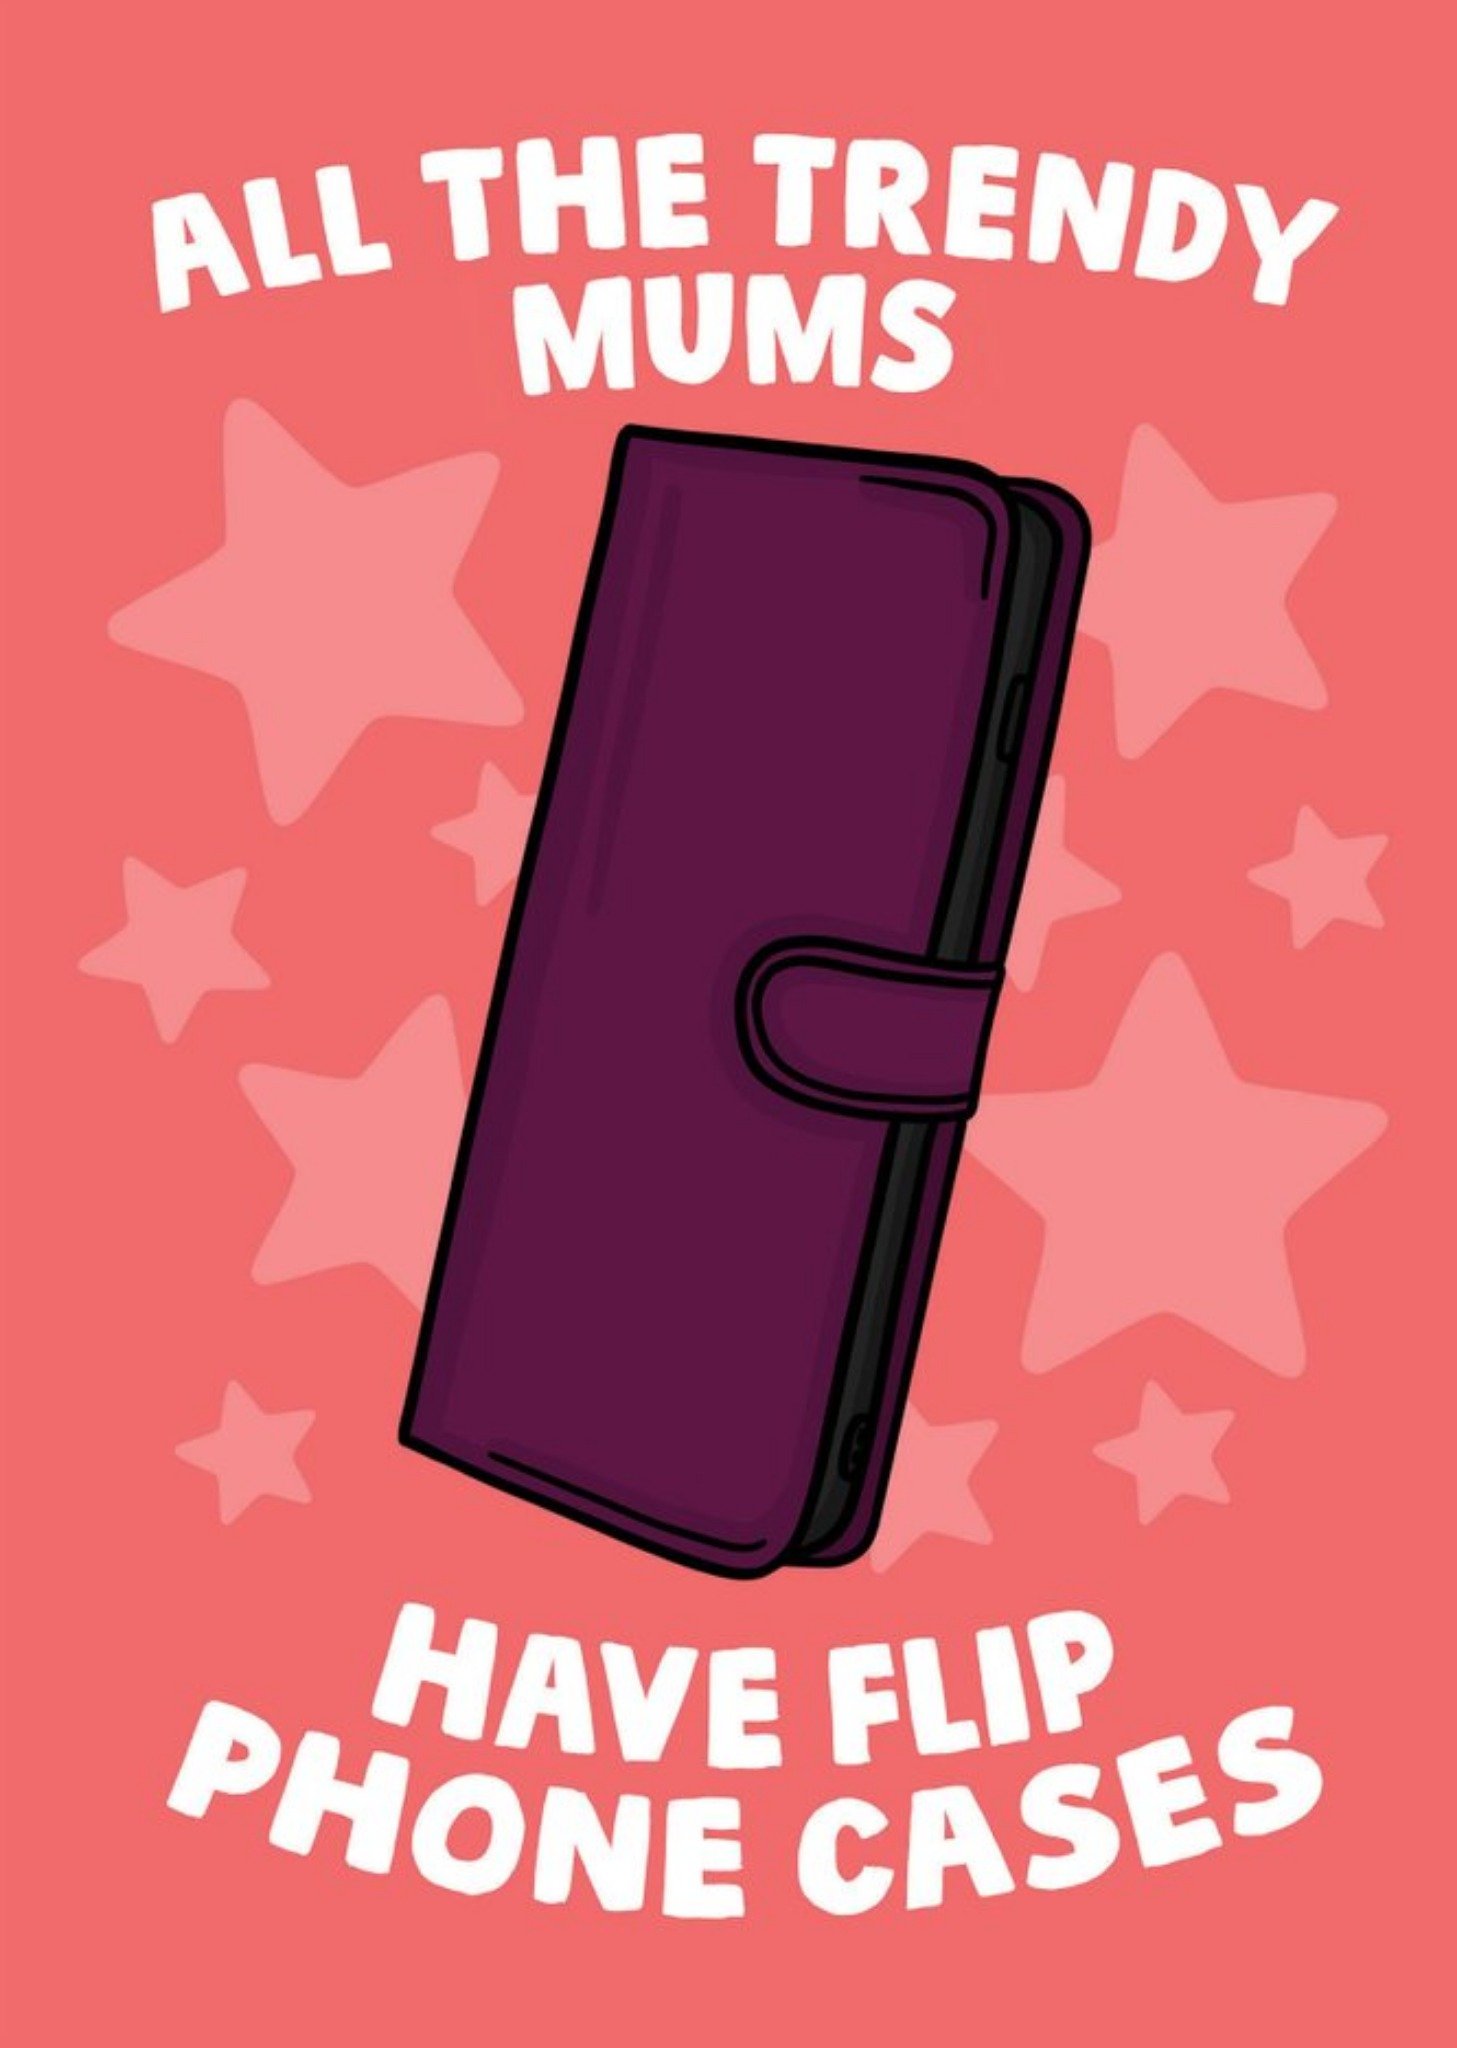 Moonpig Izzy Likes To Doodle Illustrated Funny Mobile Case Mother's Day Card Ecard